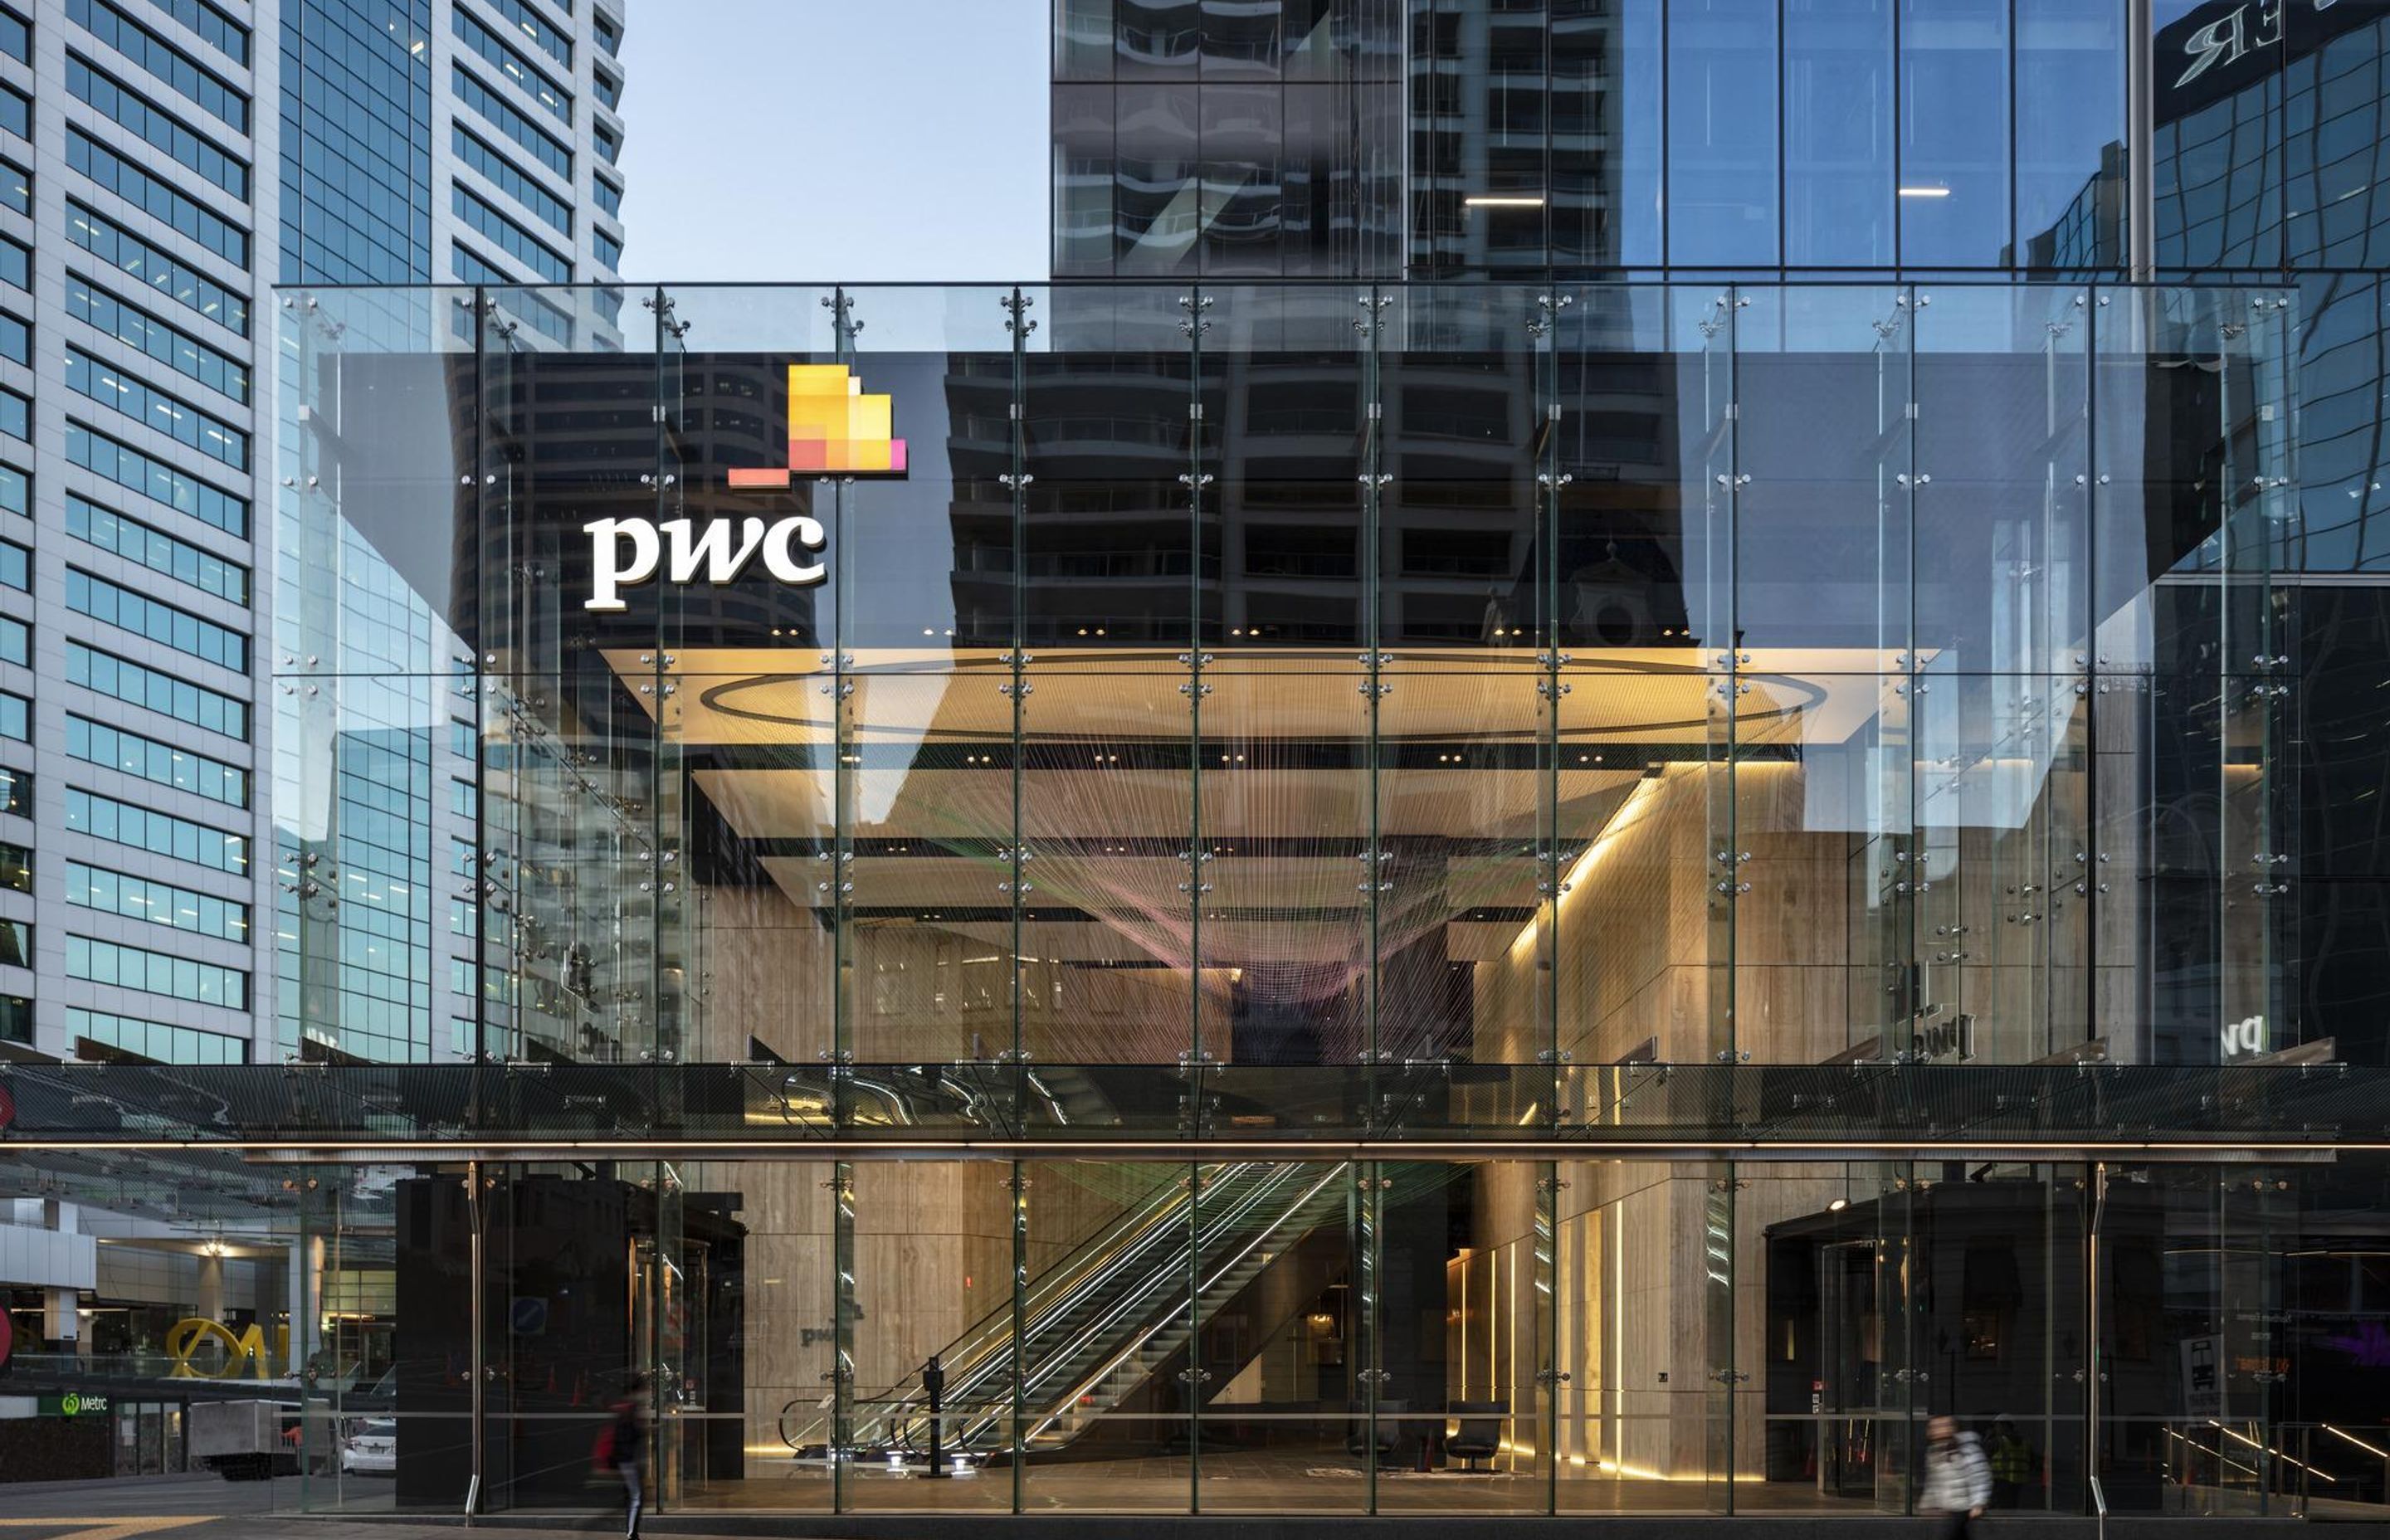 PwC Tower, Commercial Bay